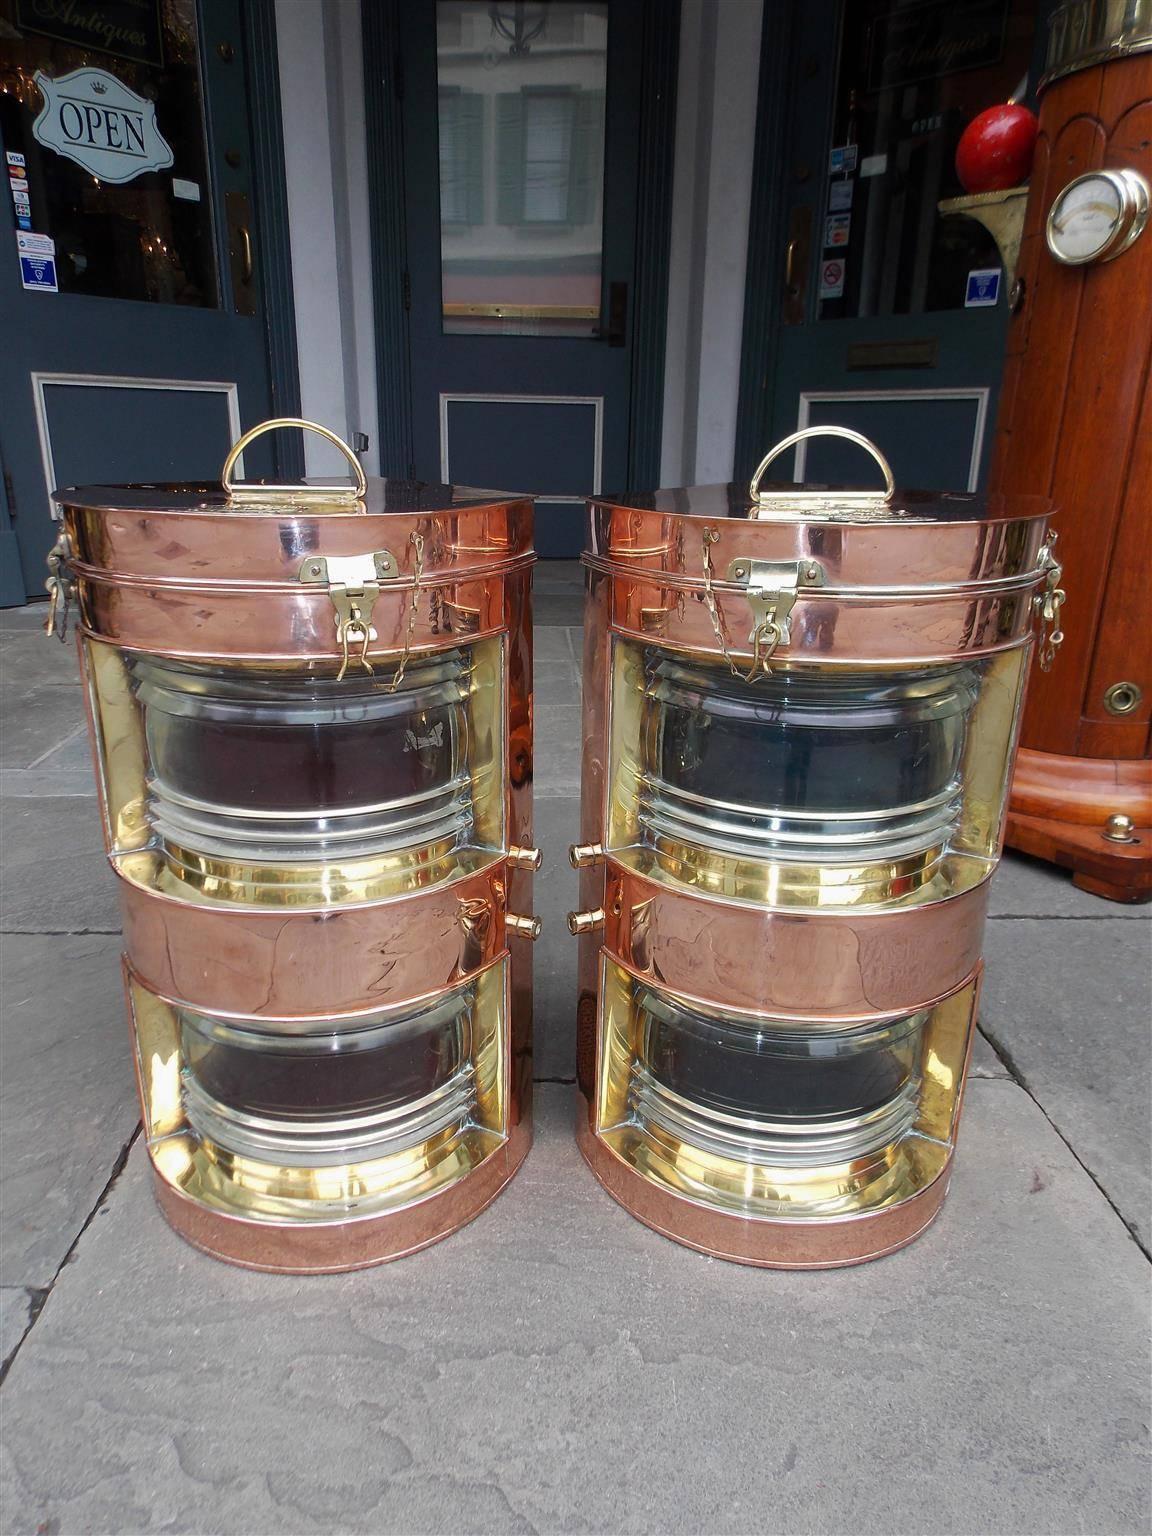 Pair of copper and brass Tung Woo double stacked port and starboard ship lanterns each with a single handle, hinged top, mounting brackets, and the original Fresnel lenses. Stamped badges on exterior top, Early 20th Century. Pair were original gas